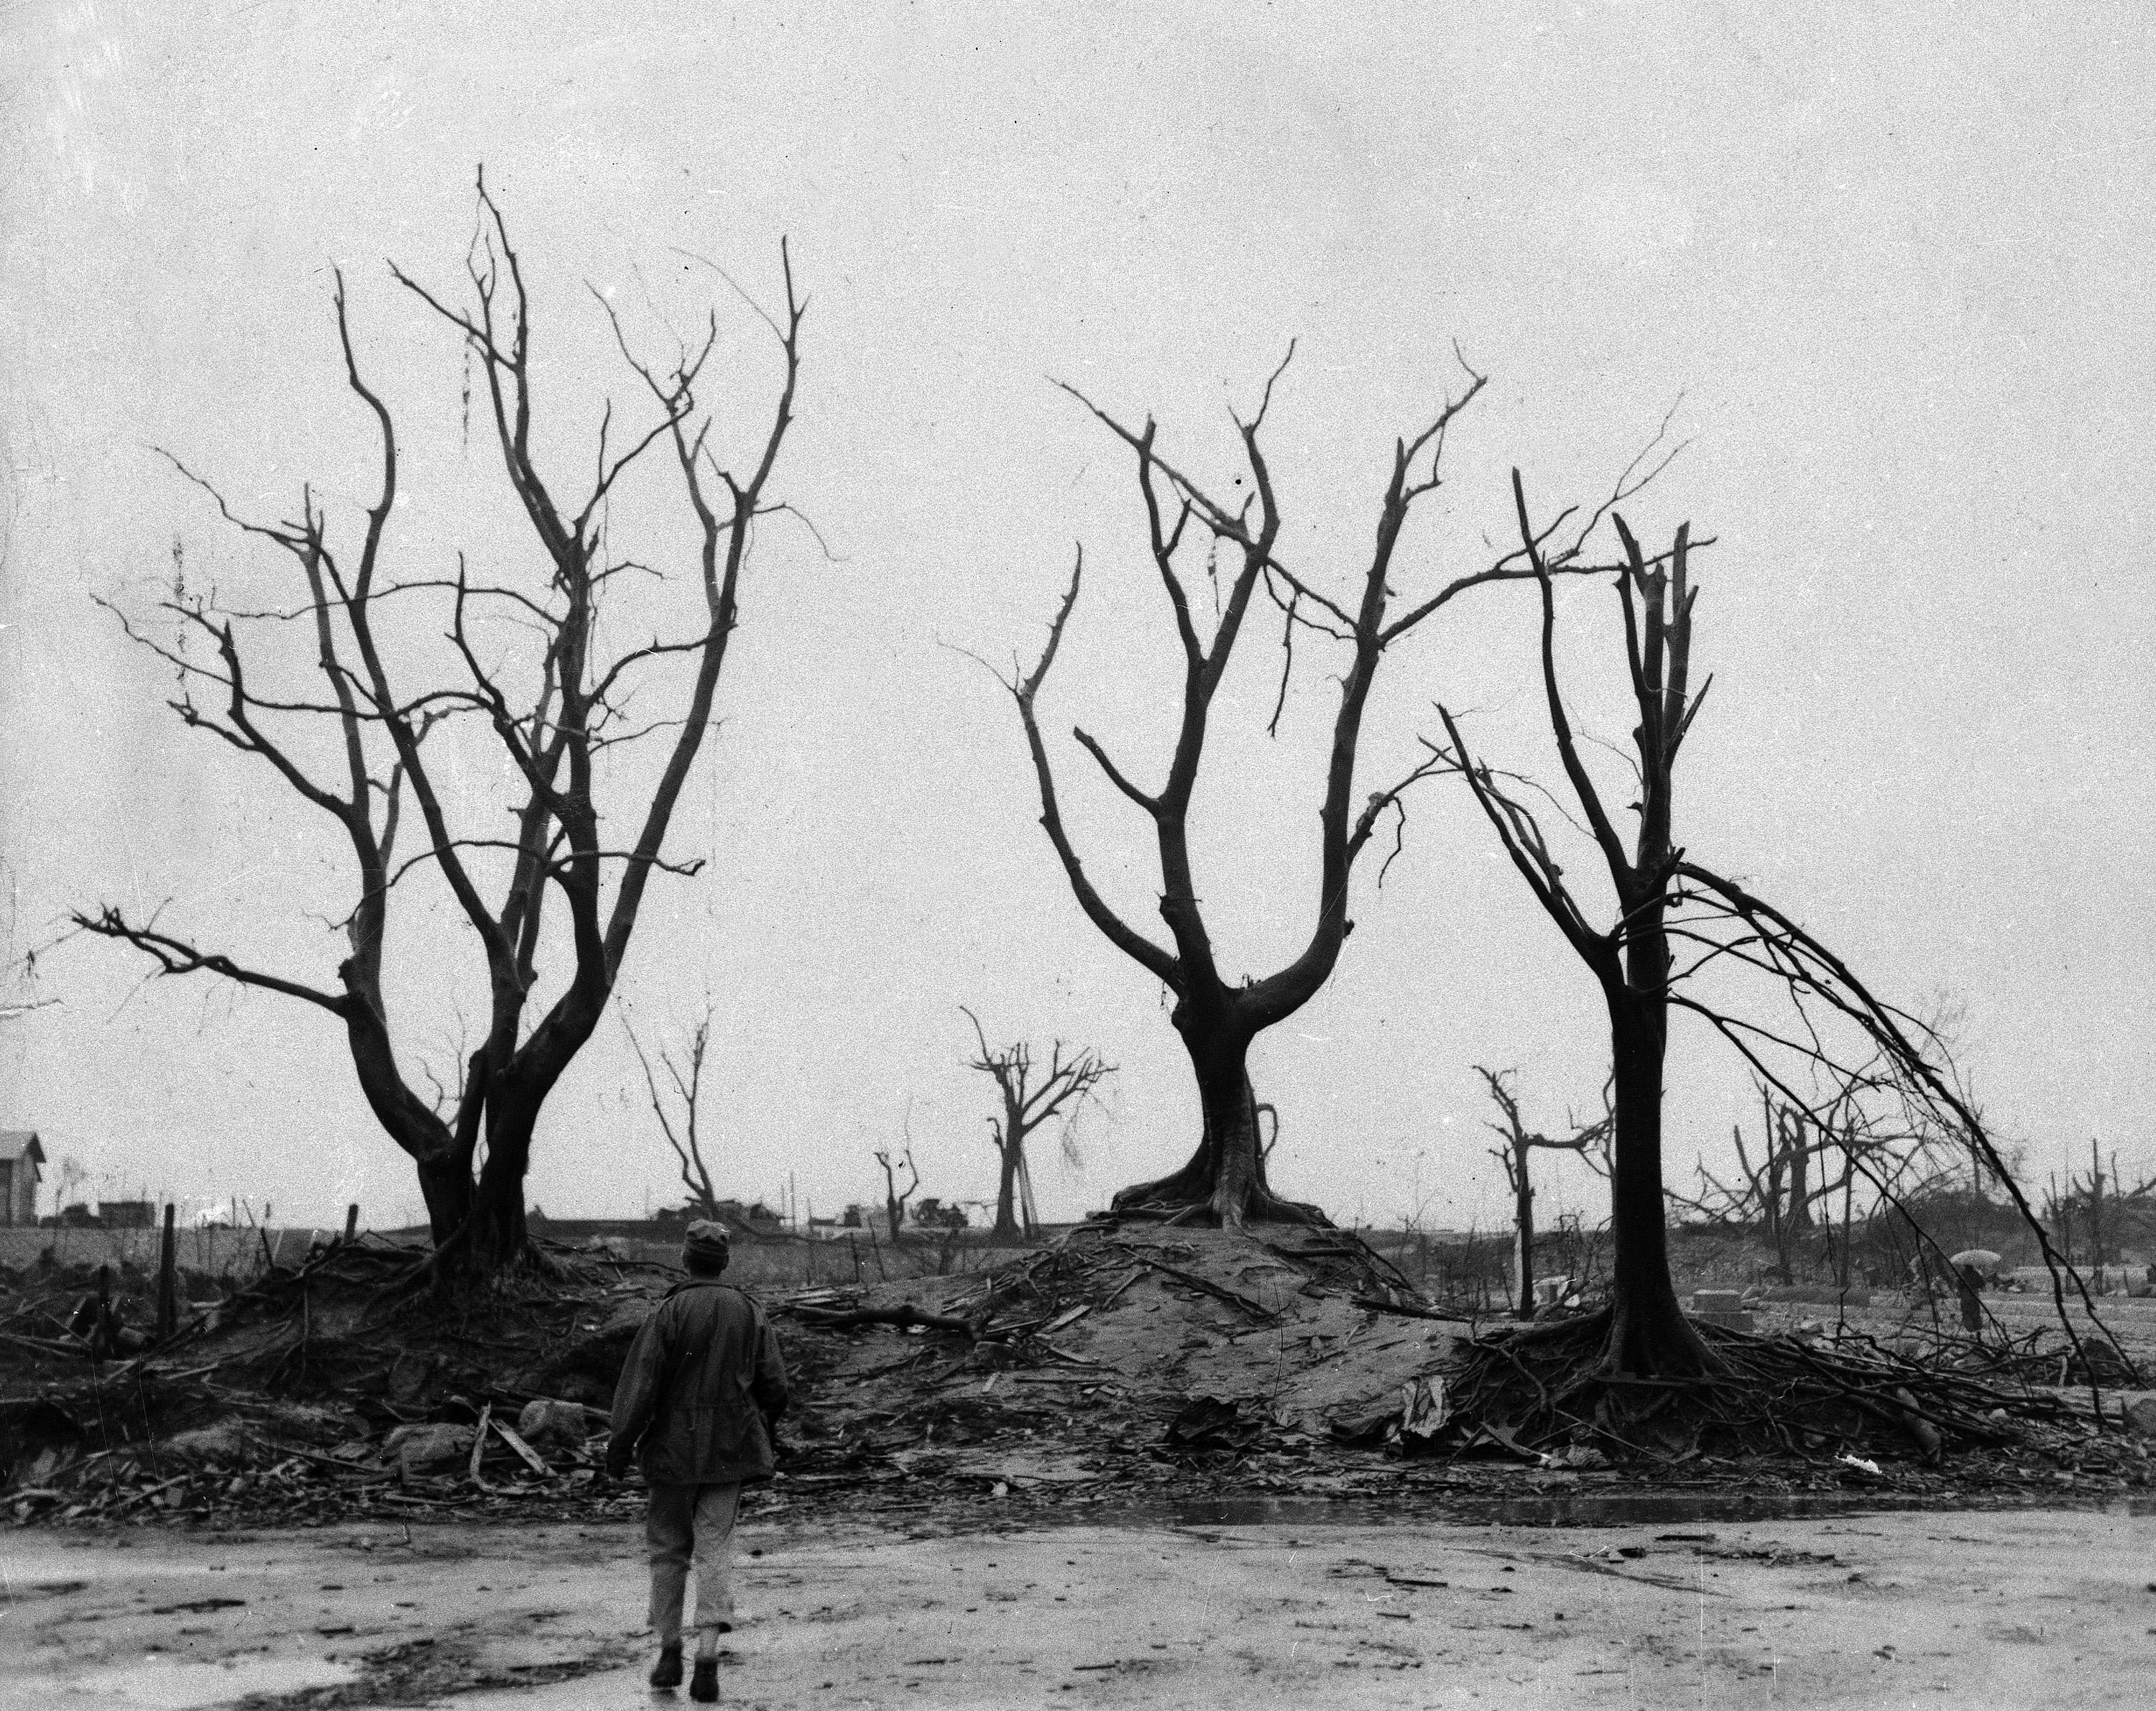 Skeletons of trees dominate the landscape in Hiroshima, Sept. 8, 1945, left in ruins after the world's first atomic bomb attack